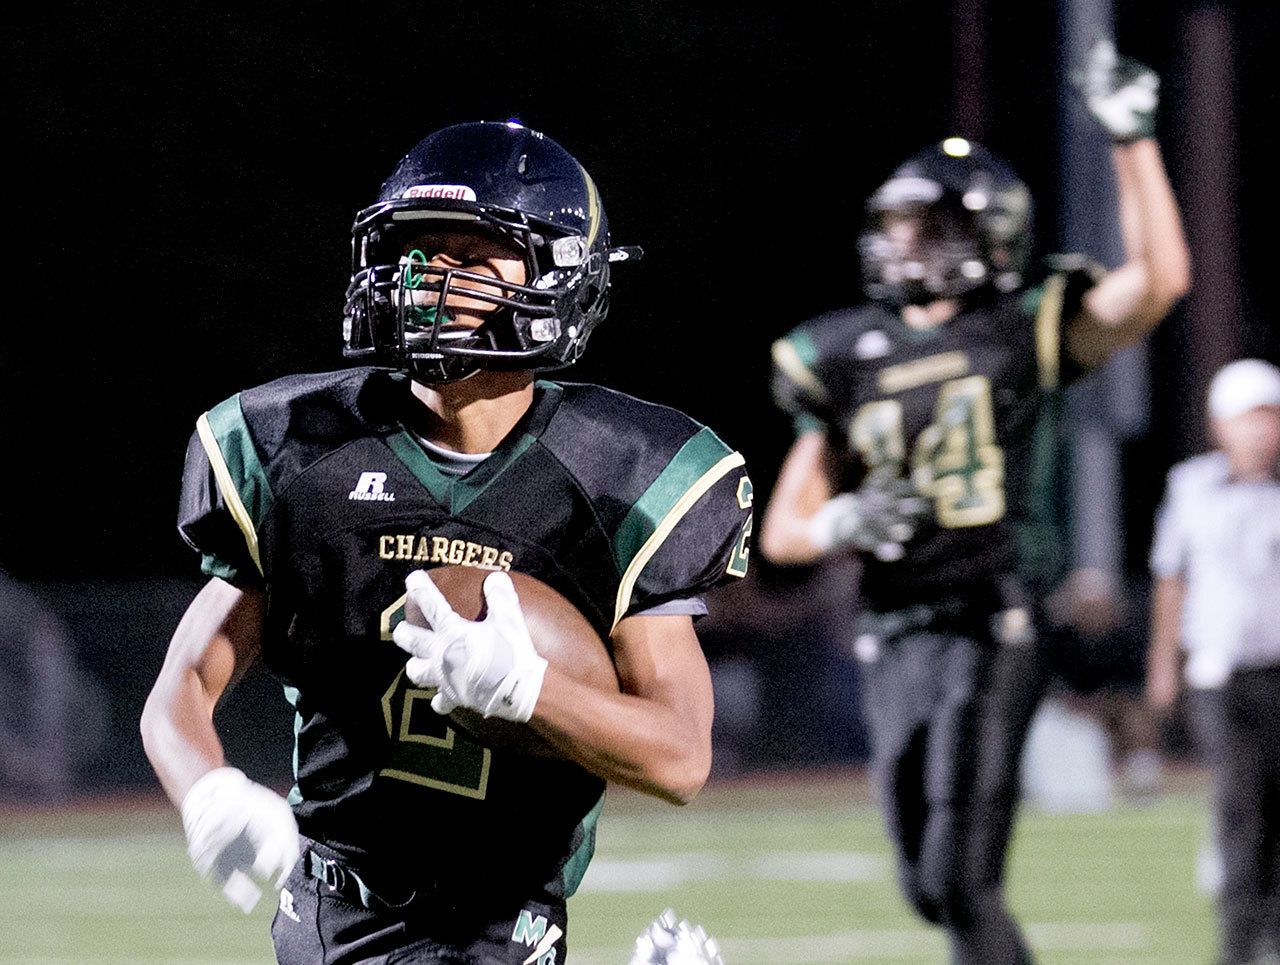 Running back Kyle Pinca is one of several experienced seniors on the Marysville Getchell football team this season. (Kevin Clark / The Herald)